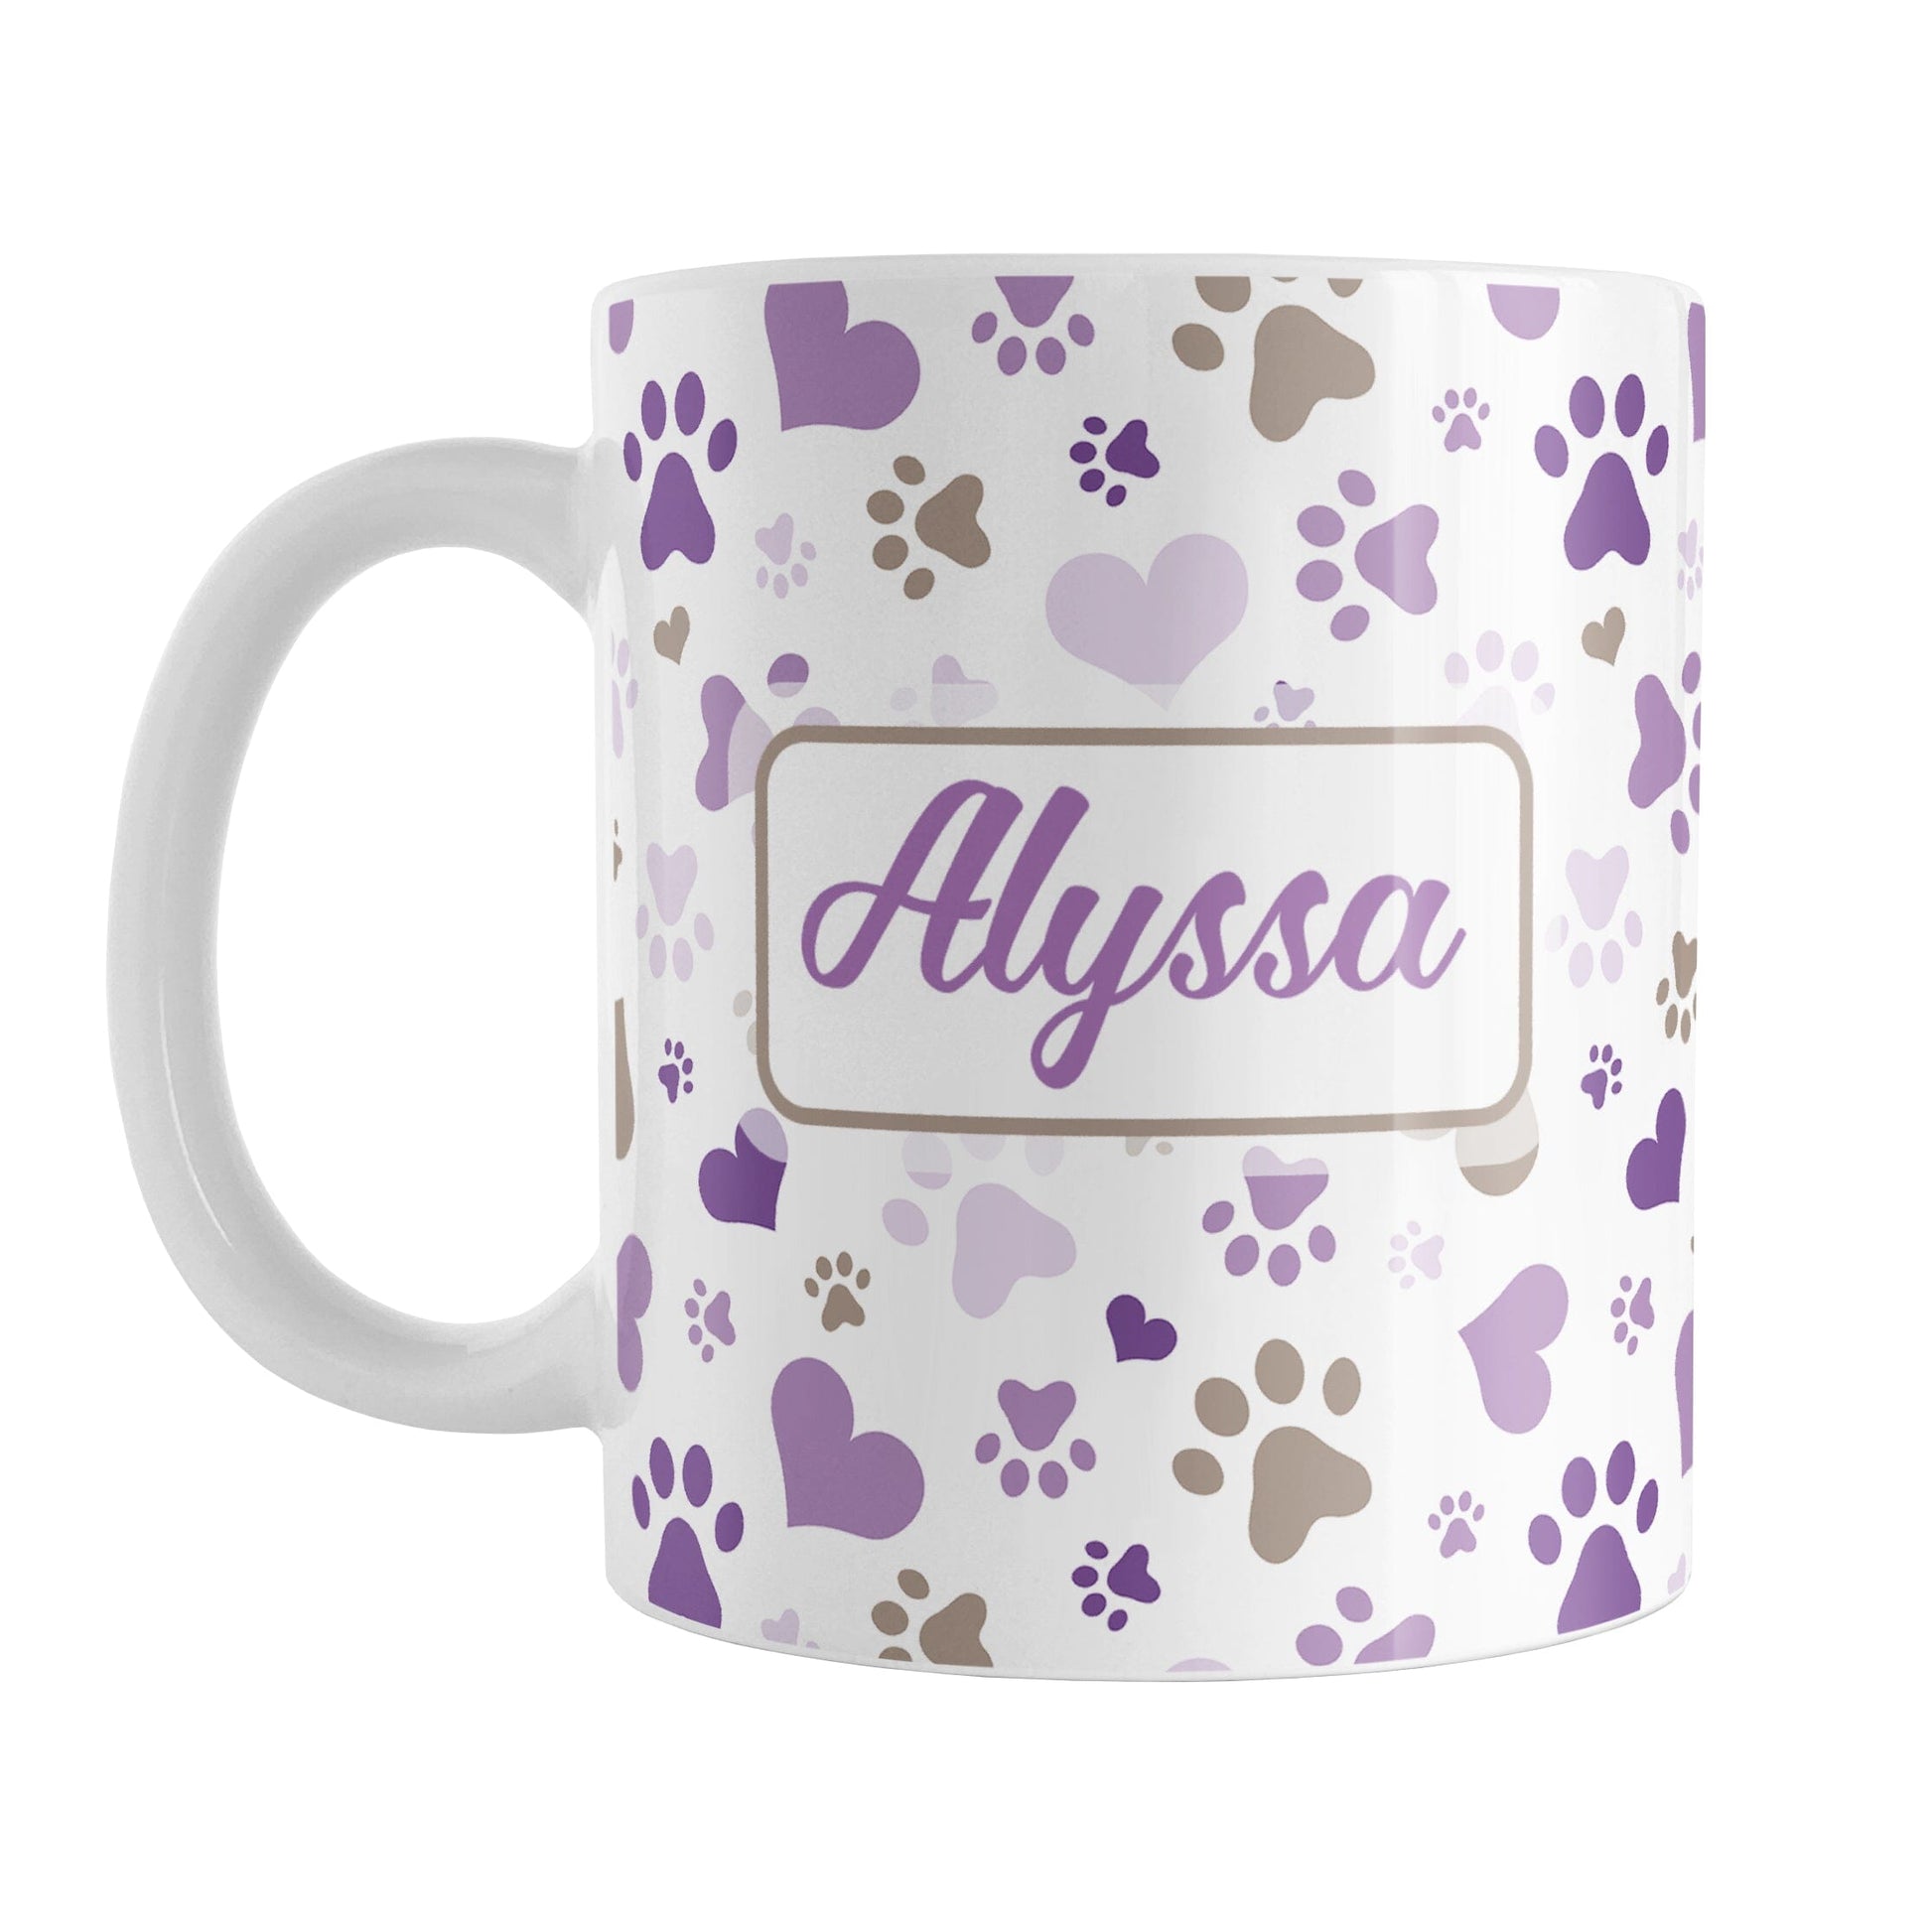 Personalized Purple Hearts and Paw Prints Mug (11oz) at Amy's Coffee Mugs. A ceramic coffee mug designed with a pattern of hearts and paw prints in brown and different shades of purple that wraps around the mug to the handle. Your personalized name is printed in purple on both sides of the mug, making it the perfect gift. This mug is perfect for people love dogs and cute paw print designs.